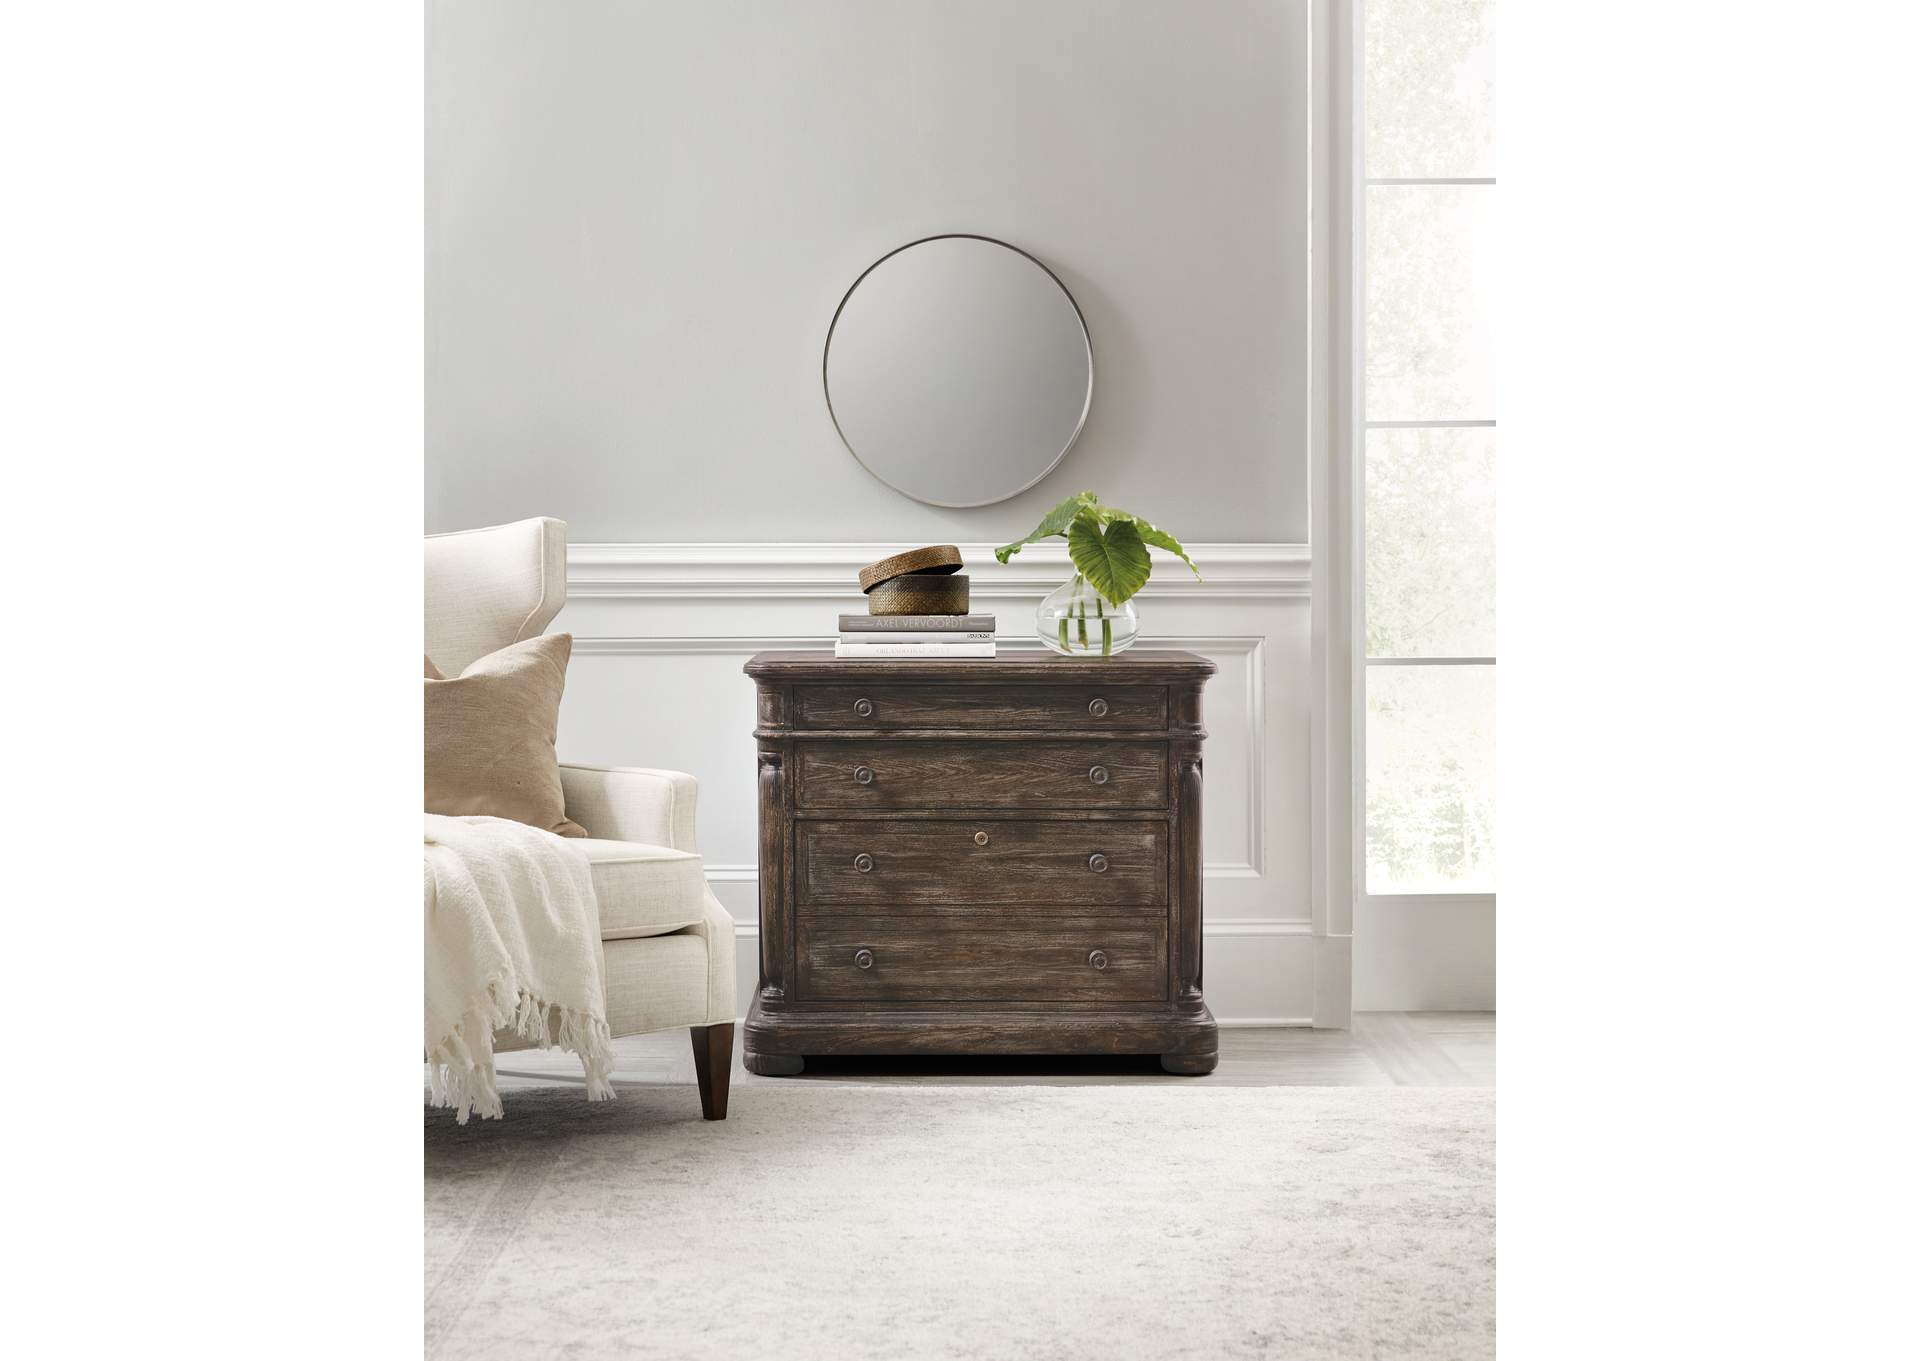 Traditions Lateral File,Hooker Furniture